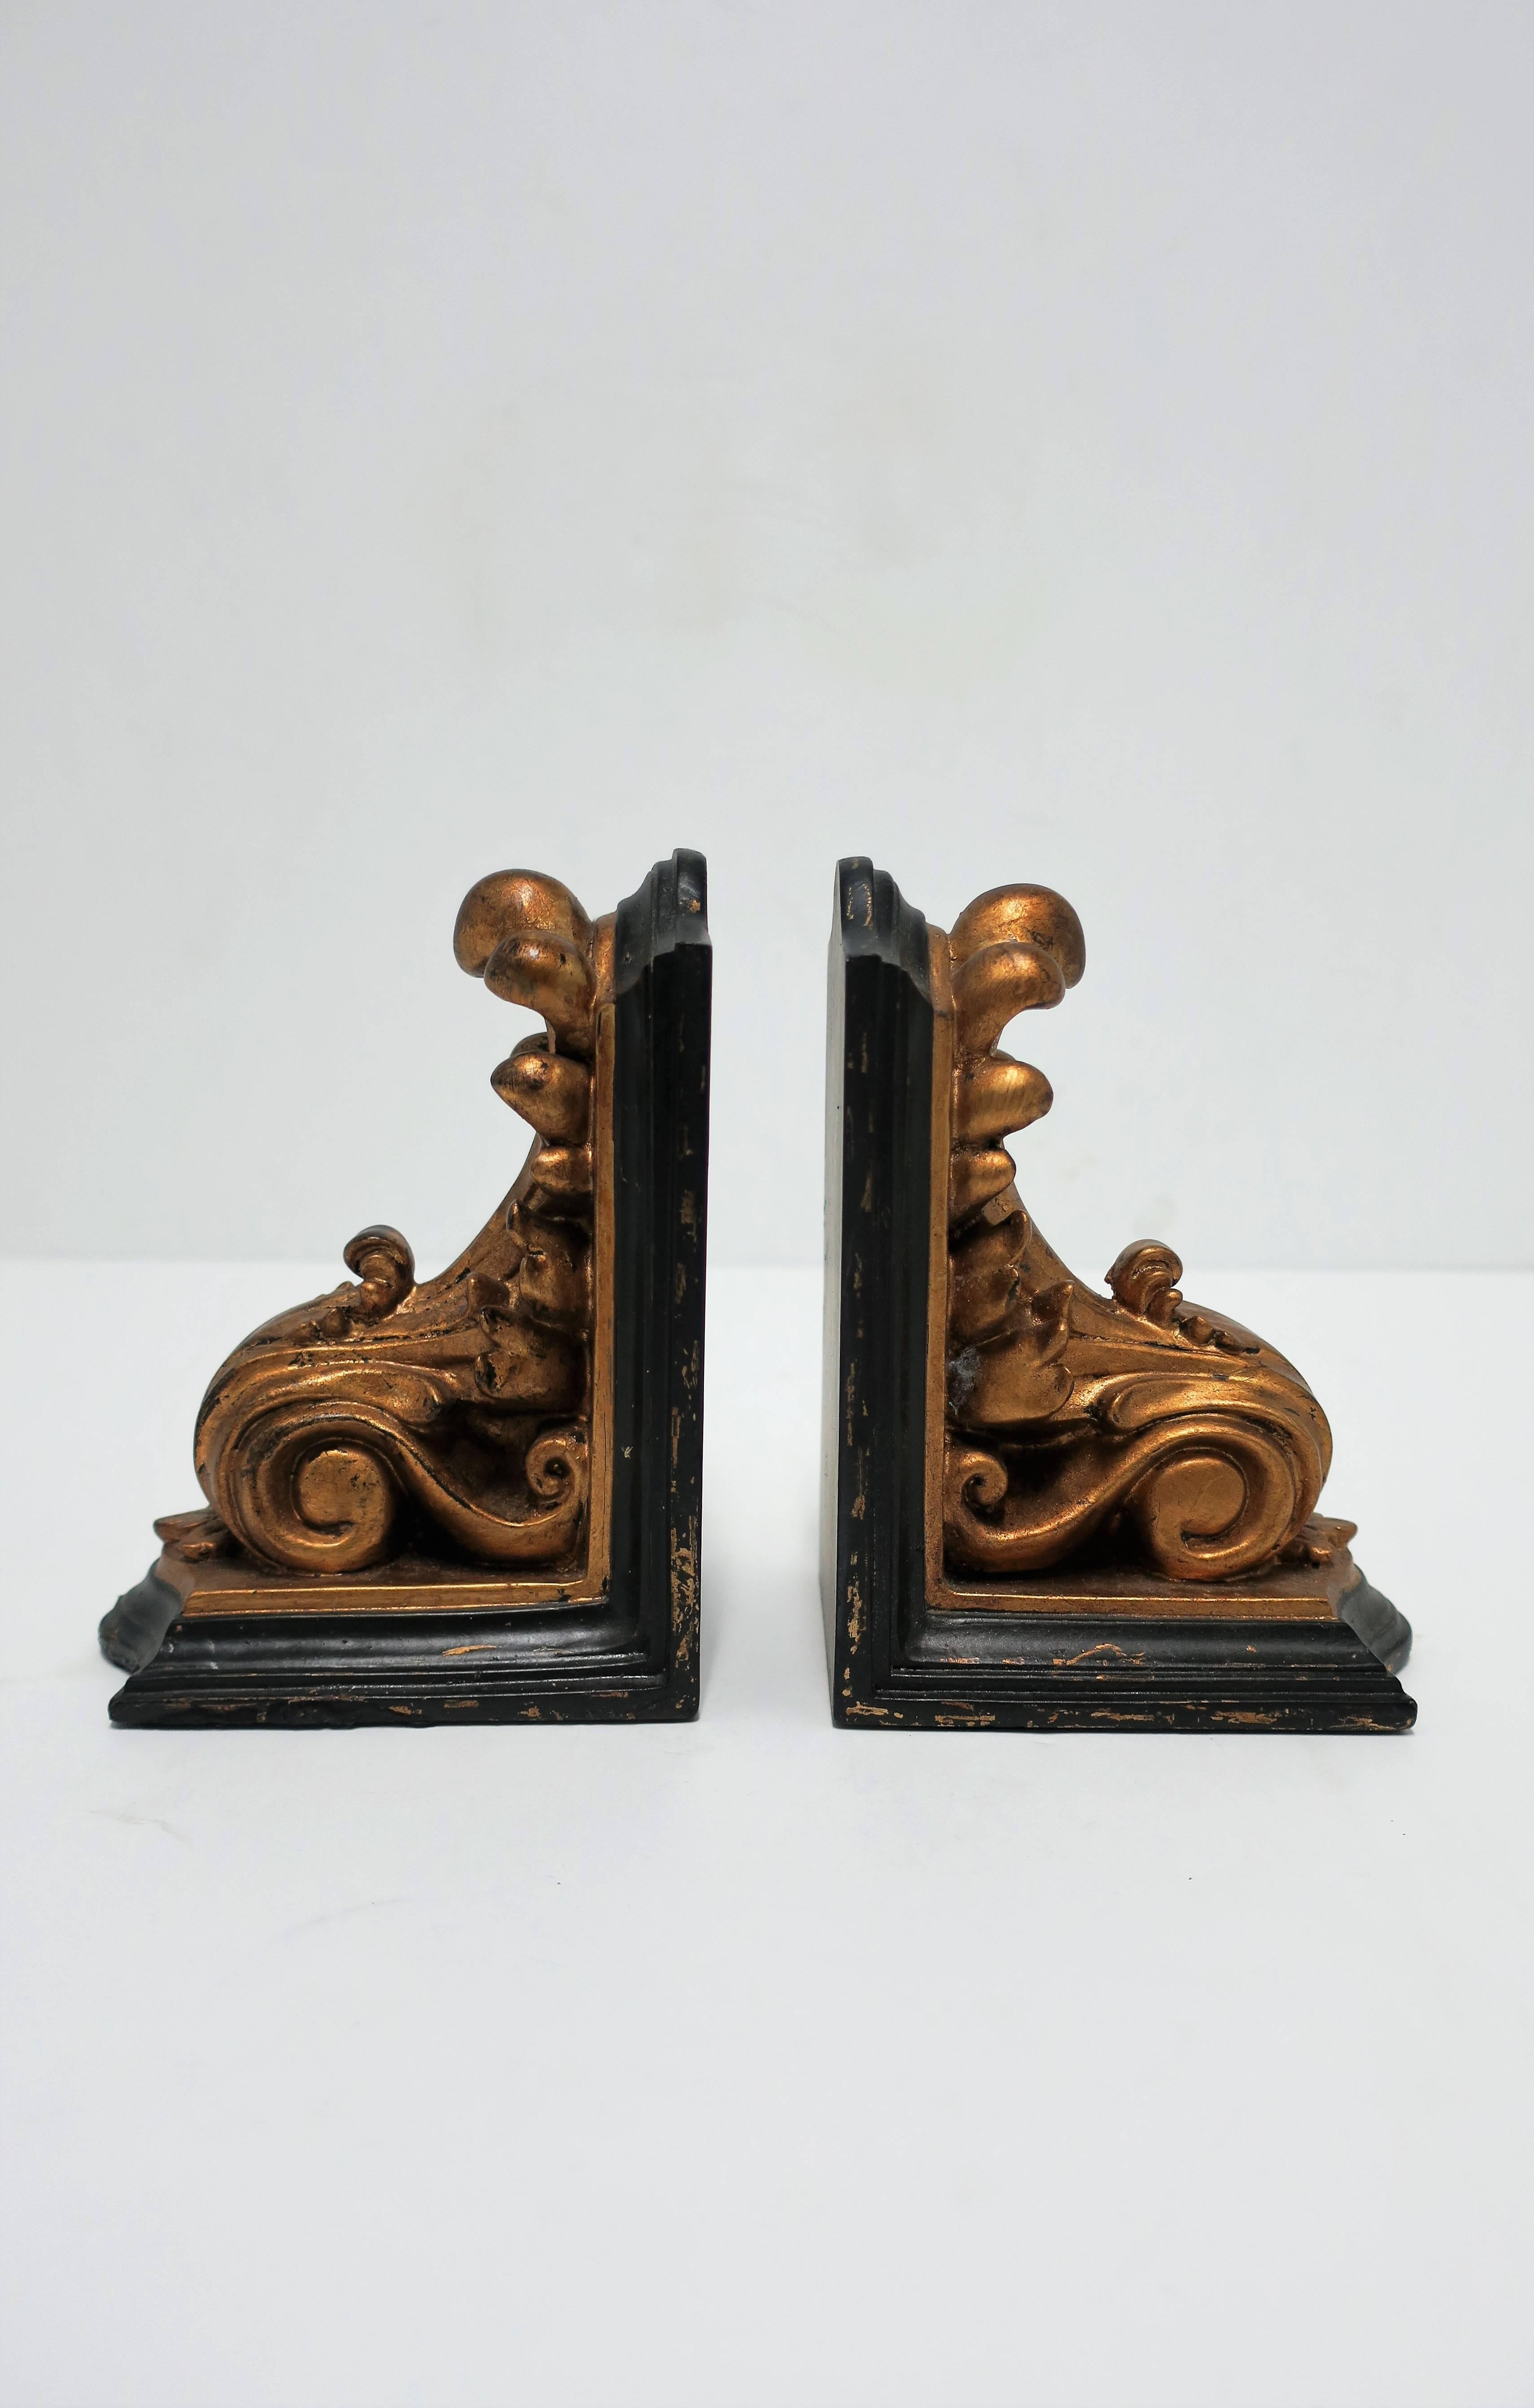 A beautiful pair of vintage black and gold Rococo style bookends. 

Each measure: 4.75 in. D x 3.5 in. W x 6.25 in. H

Pair available here online. By request, pair can be made available by appointment to the Trade in New York.